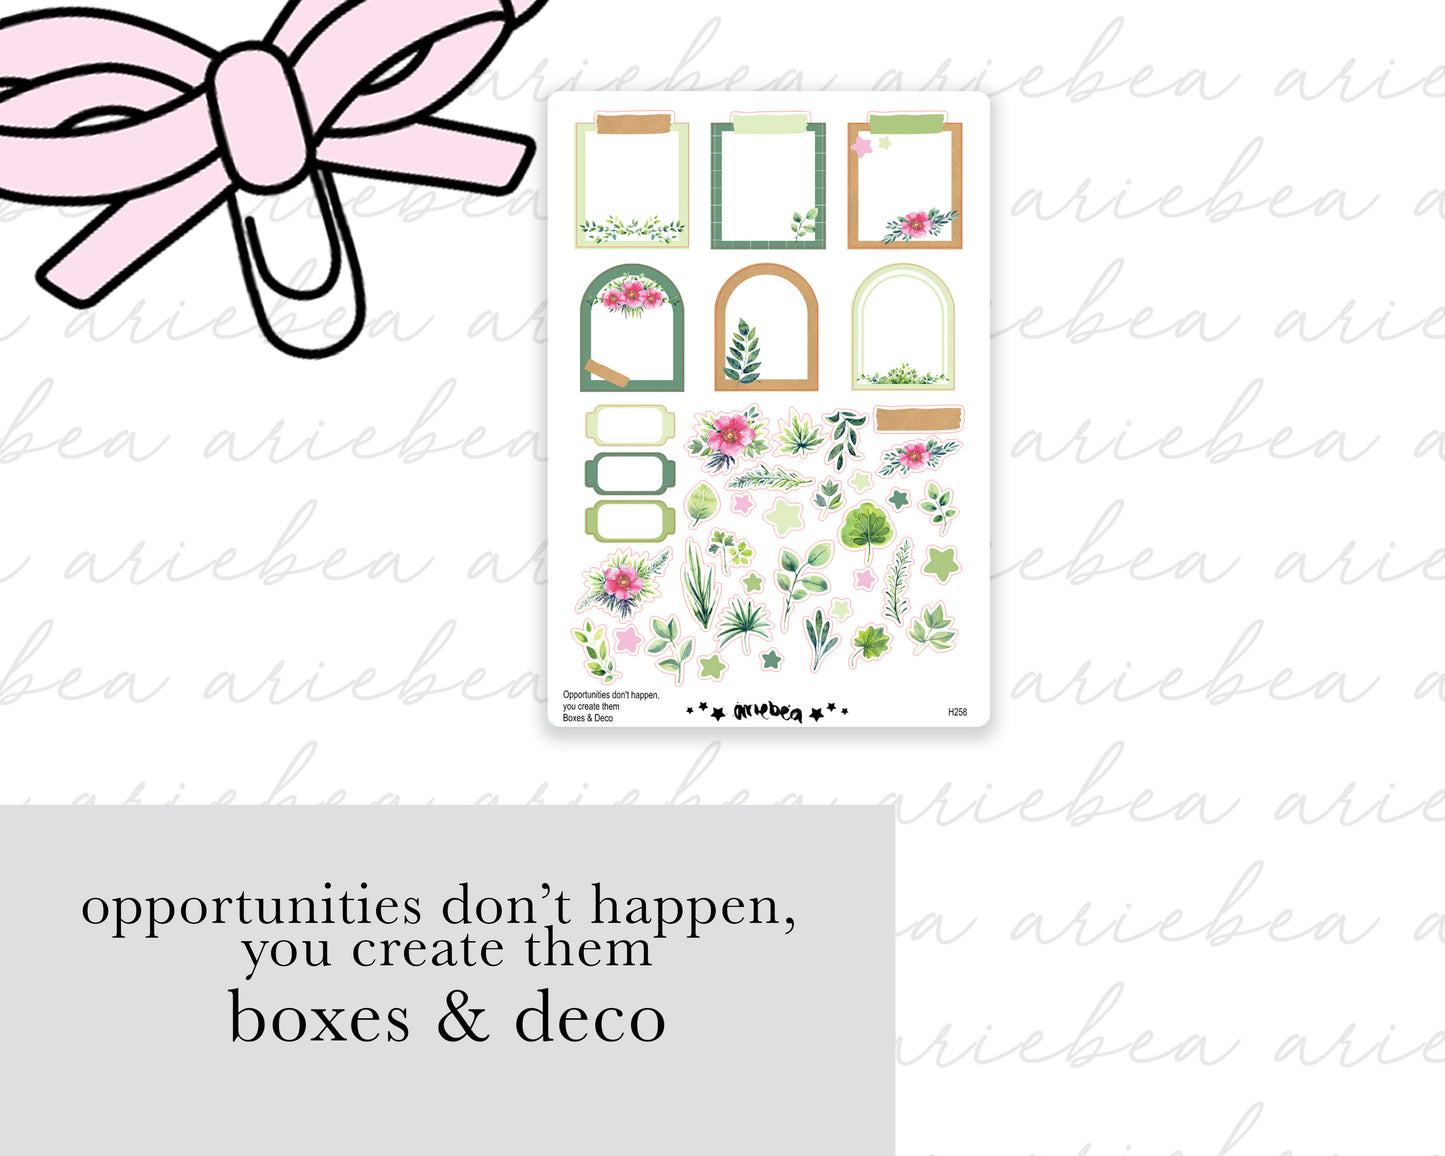 Opportunities don’t happen, you create them Boxes & Deco